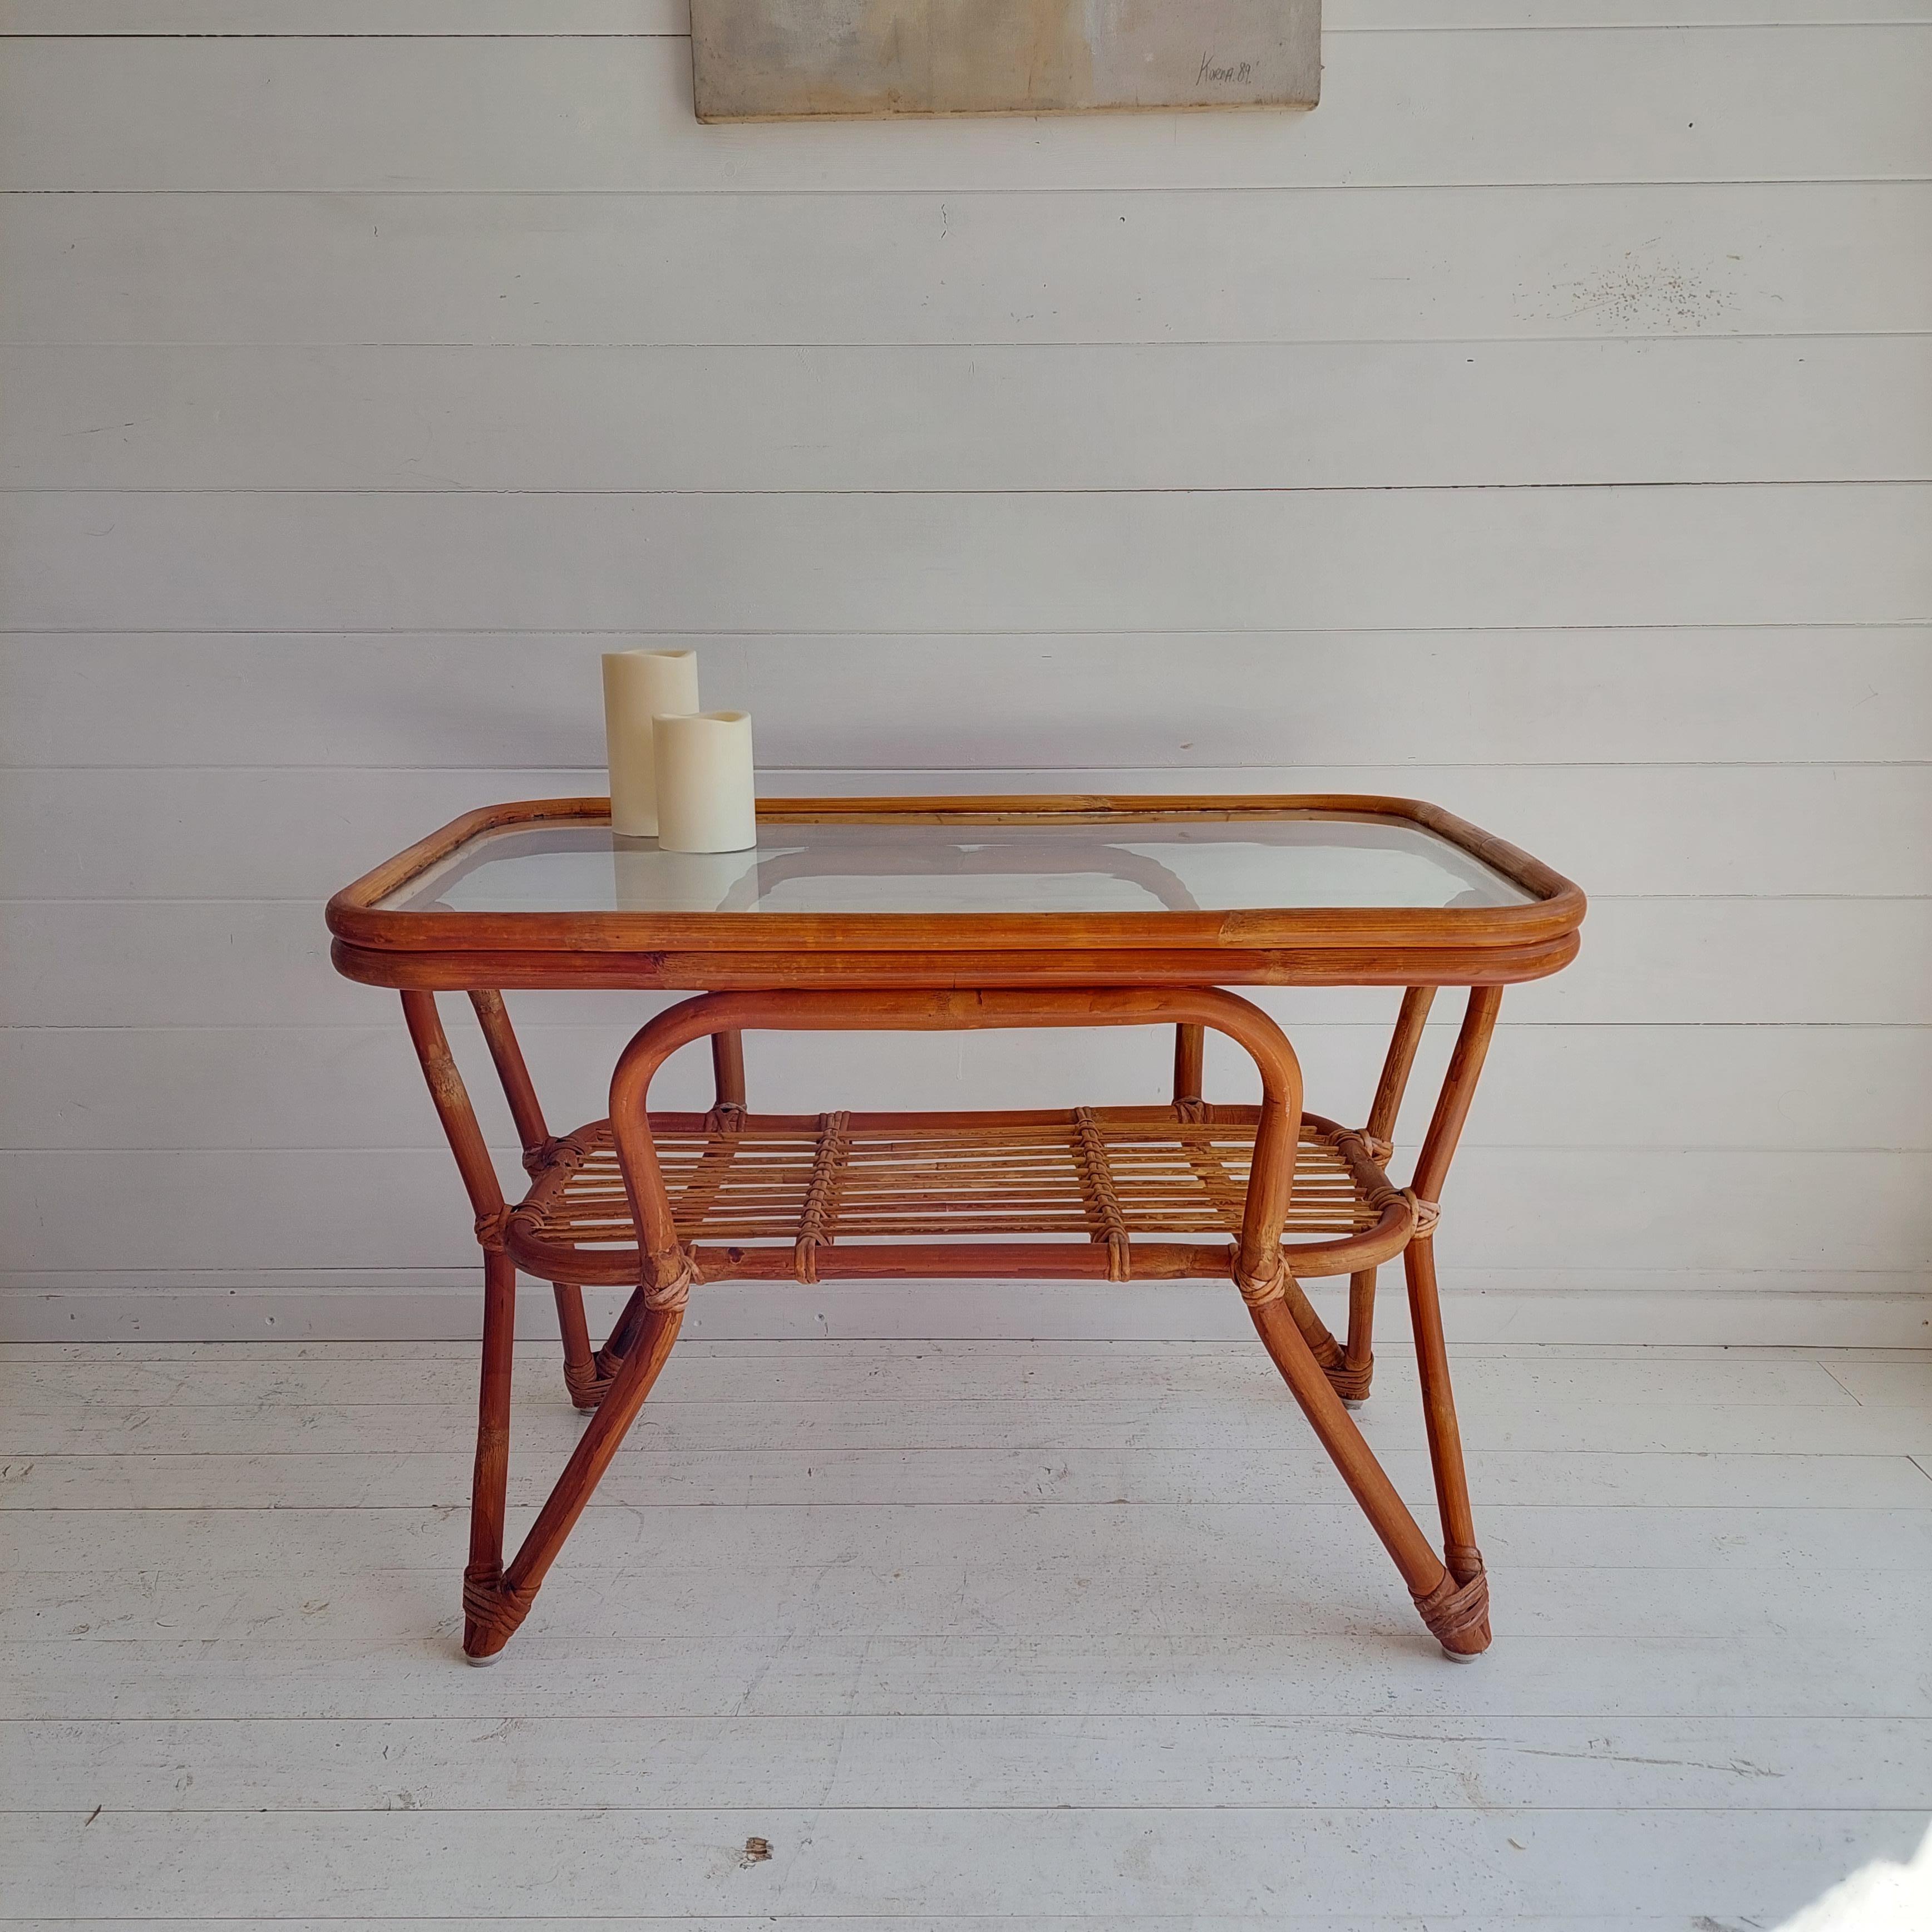 Very nice and elegant Bambo coffee table.
Manufactured under influence of Rohe Noordwolde Holland. 1950s.
Gorgeous design.

A versatile piece that will stand out in your living room.
Bohemian look
A trendy bamboo piece to place besides your